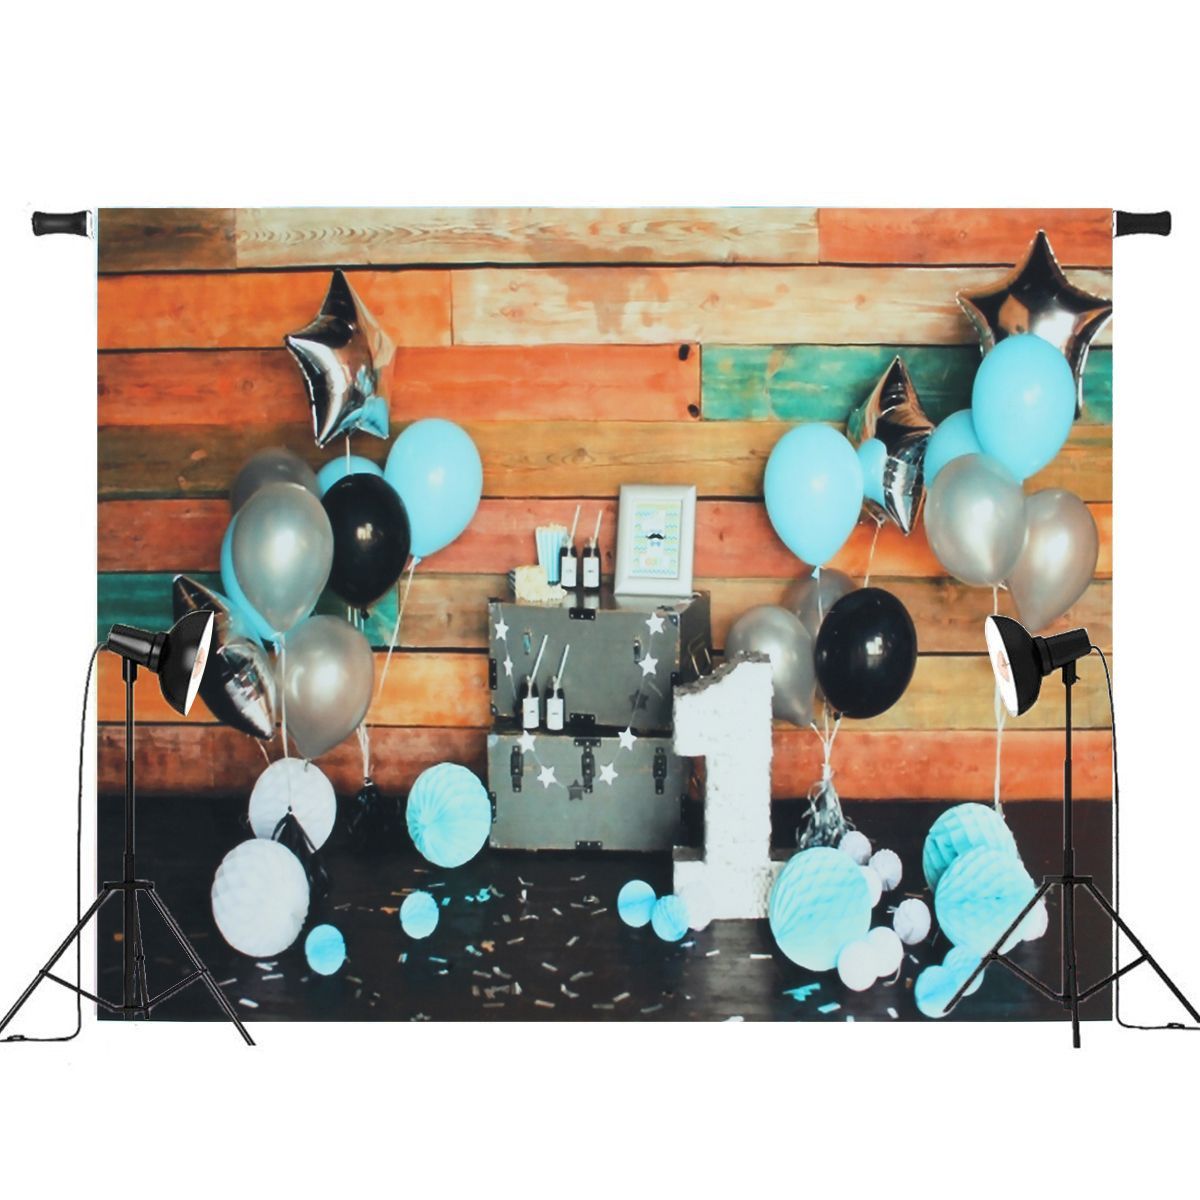 5x3ft-7x5ft-Blue-Balloon-Colorful-Wall-Baby-1st-Birthday-Photography-Backdrop-Studio-Prop-Background-1338694